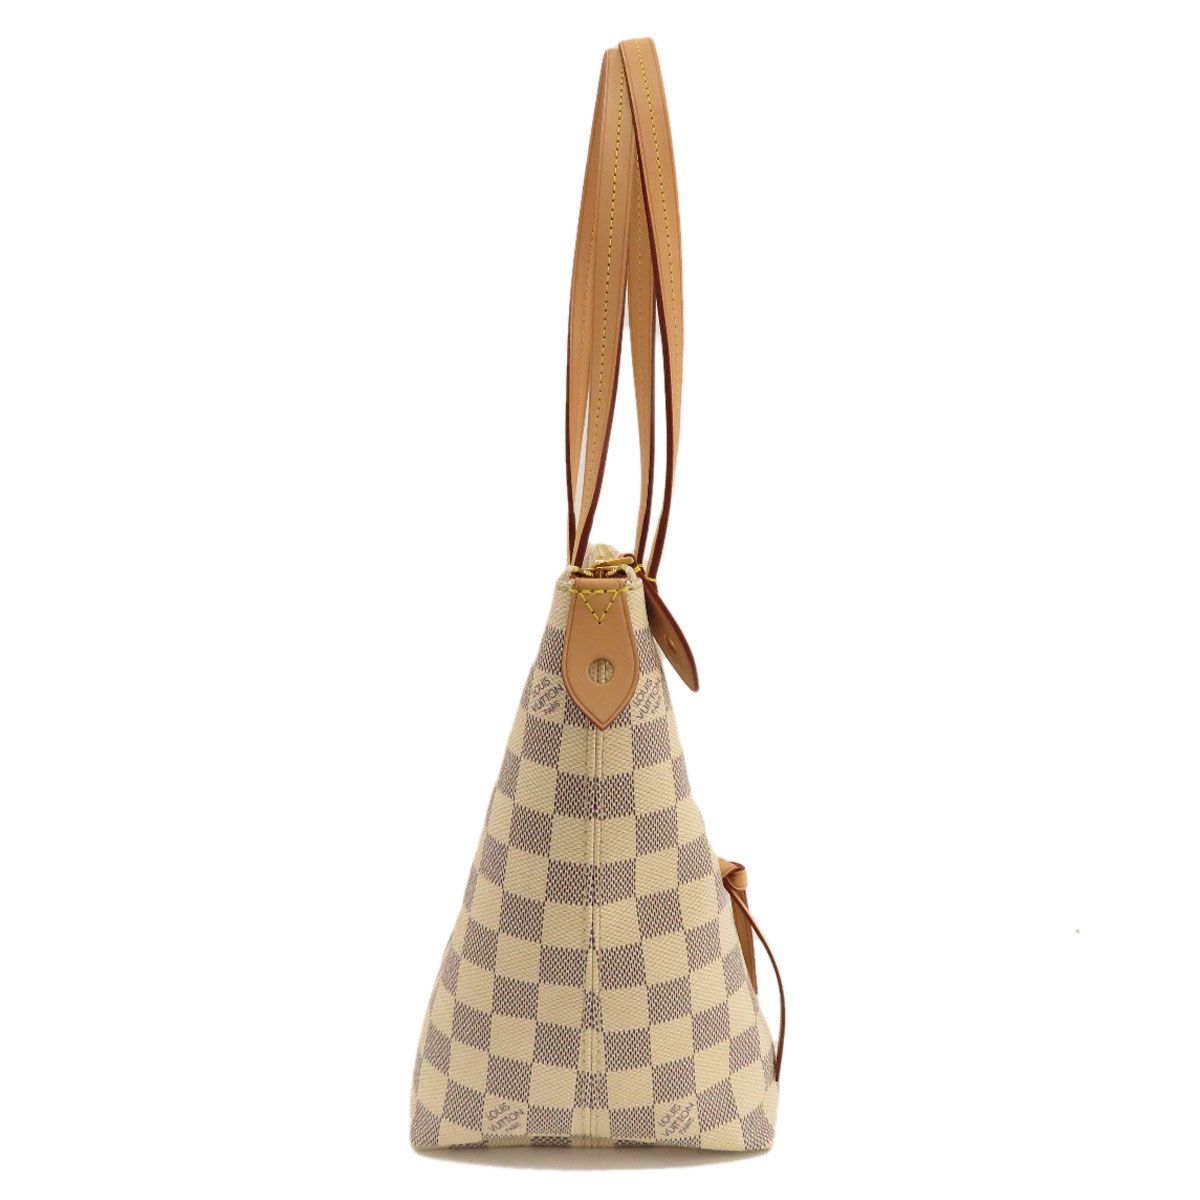 LOUIS VUITTON ルイヴィトン N44039 イエナPM ダミエ アズール トート